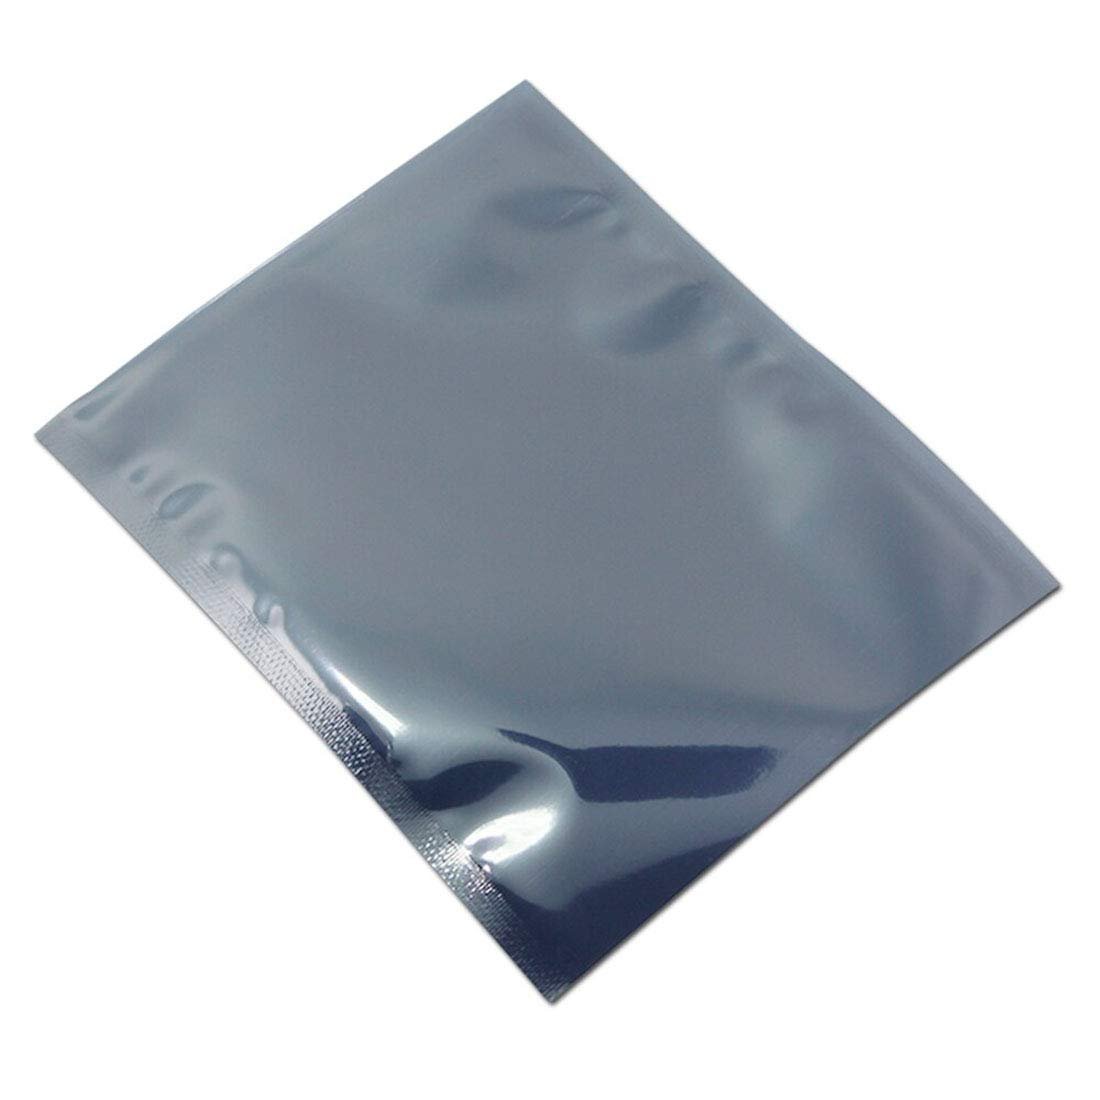 Primary image for ESD Anti Static Shielding Bags 3 mil Flat Open Top Electrostatic Bags